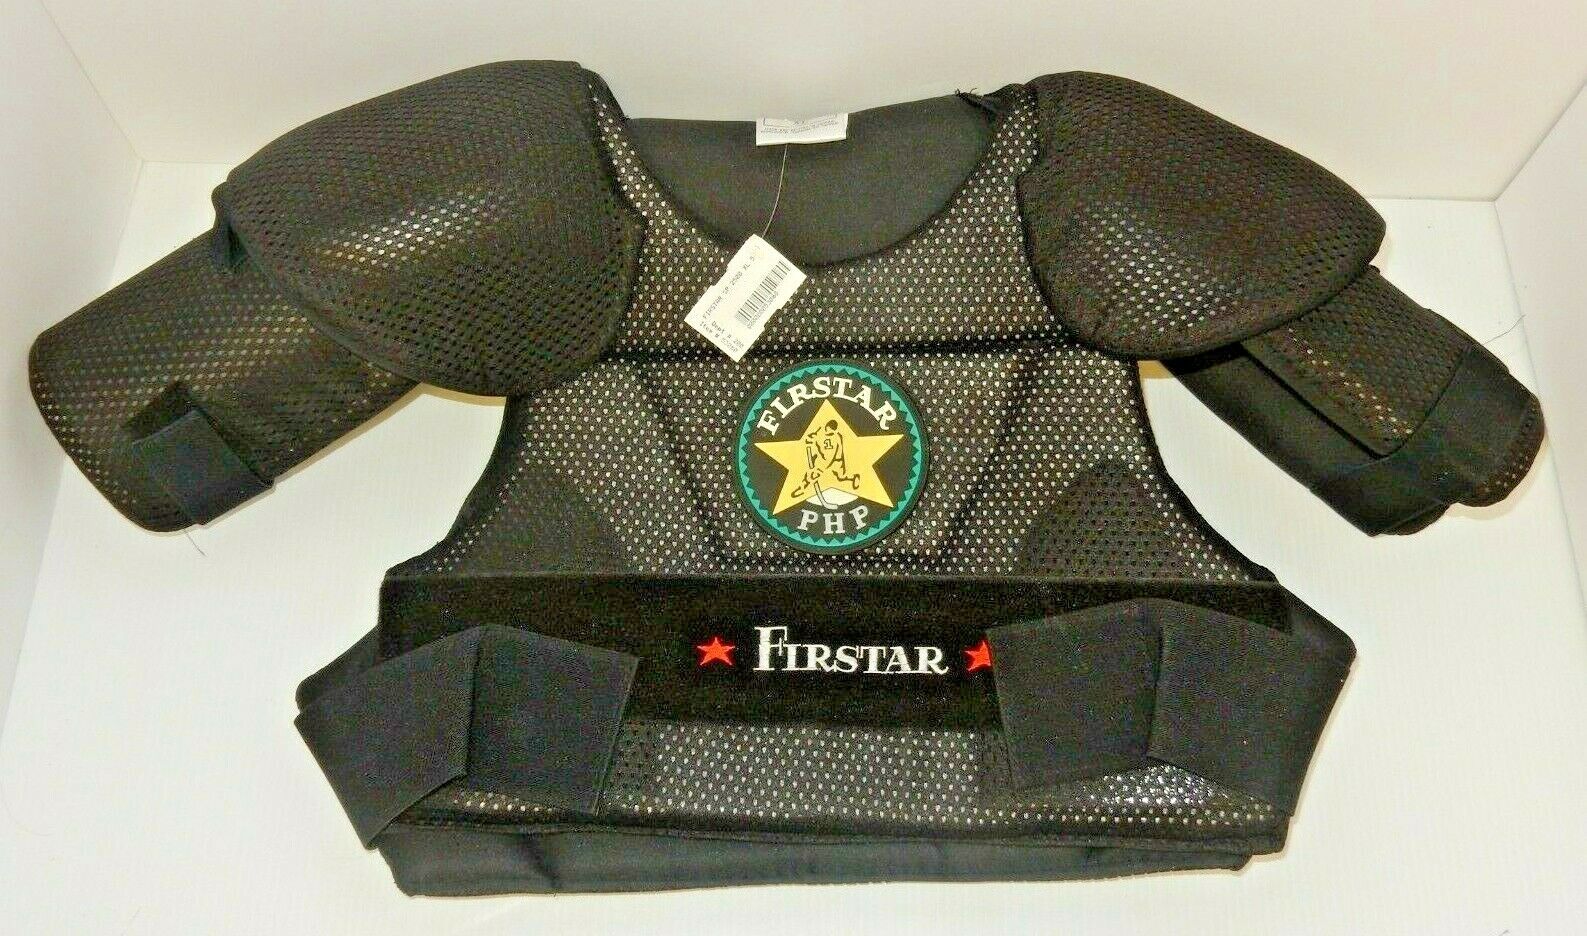 NEW FIRSTAR PHP SP 2500 XL ICE HOCKEY SHOULDER PADS - SIZE: MEN'